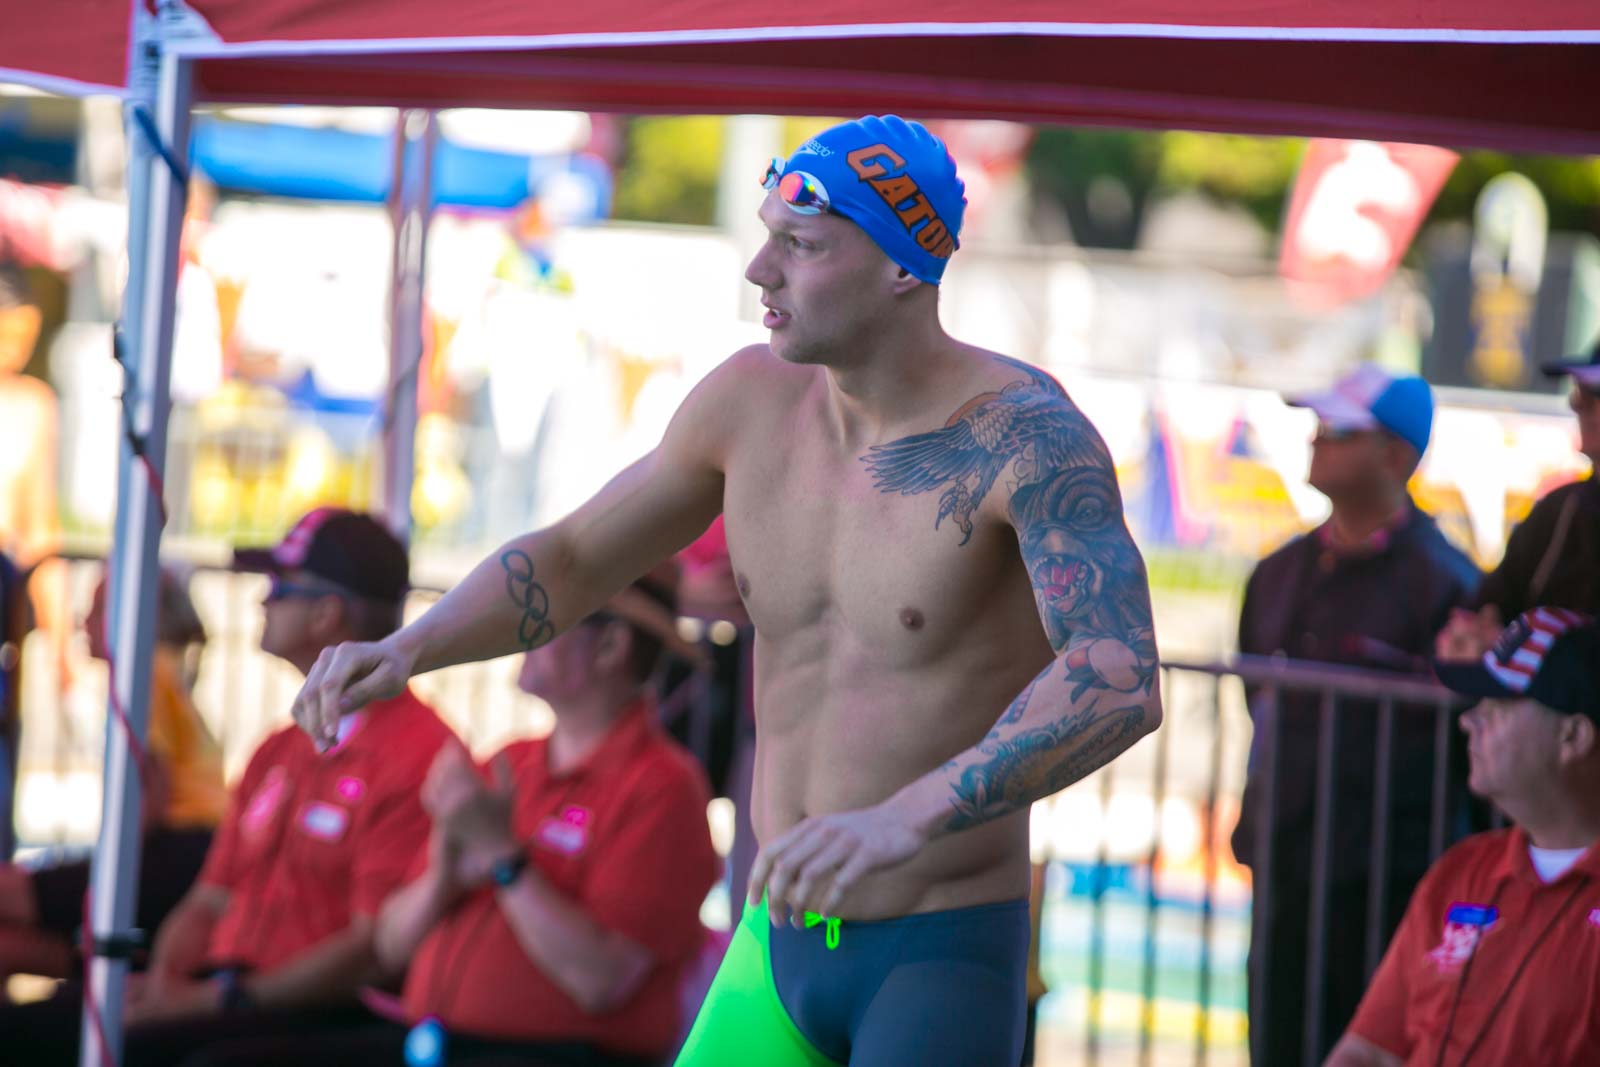 Chaotic waters: US stars win, but Dressel won't get 6 golds